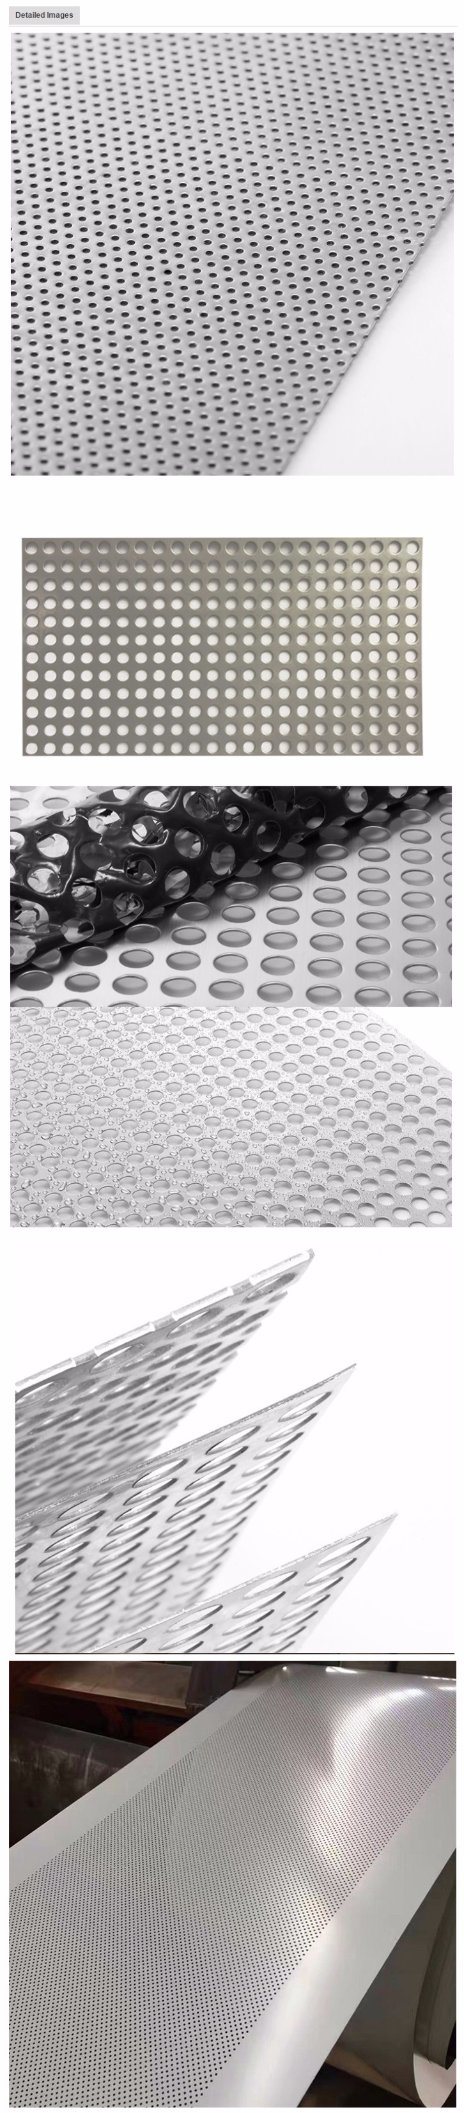 2mm Dia 1mm Plate Staggered Pitch Round Holes White Color Perforated Metal